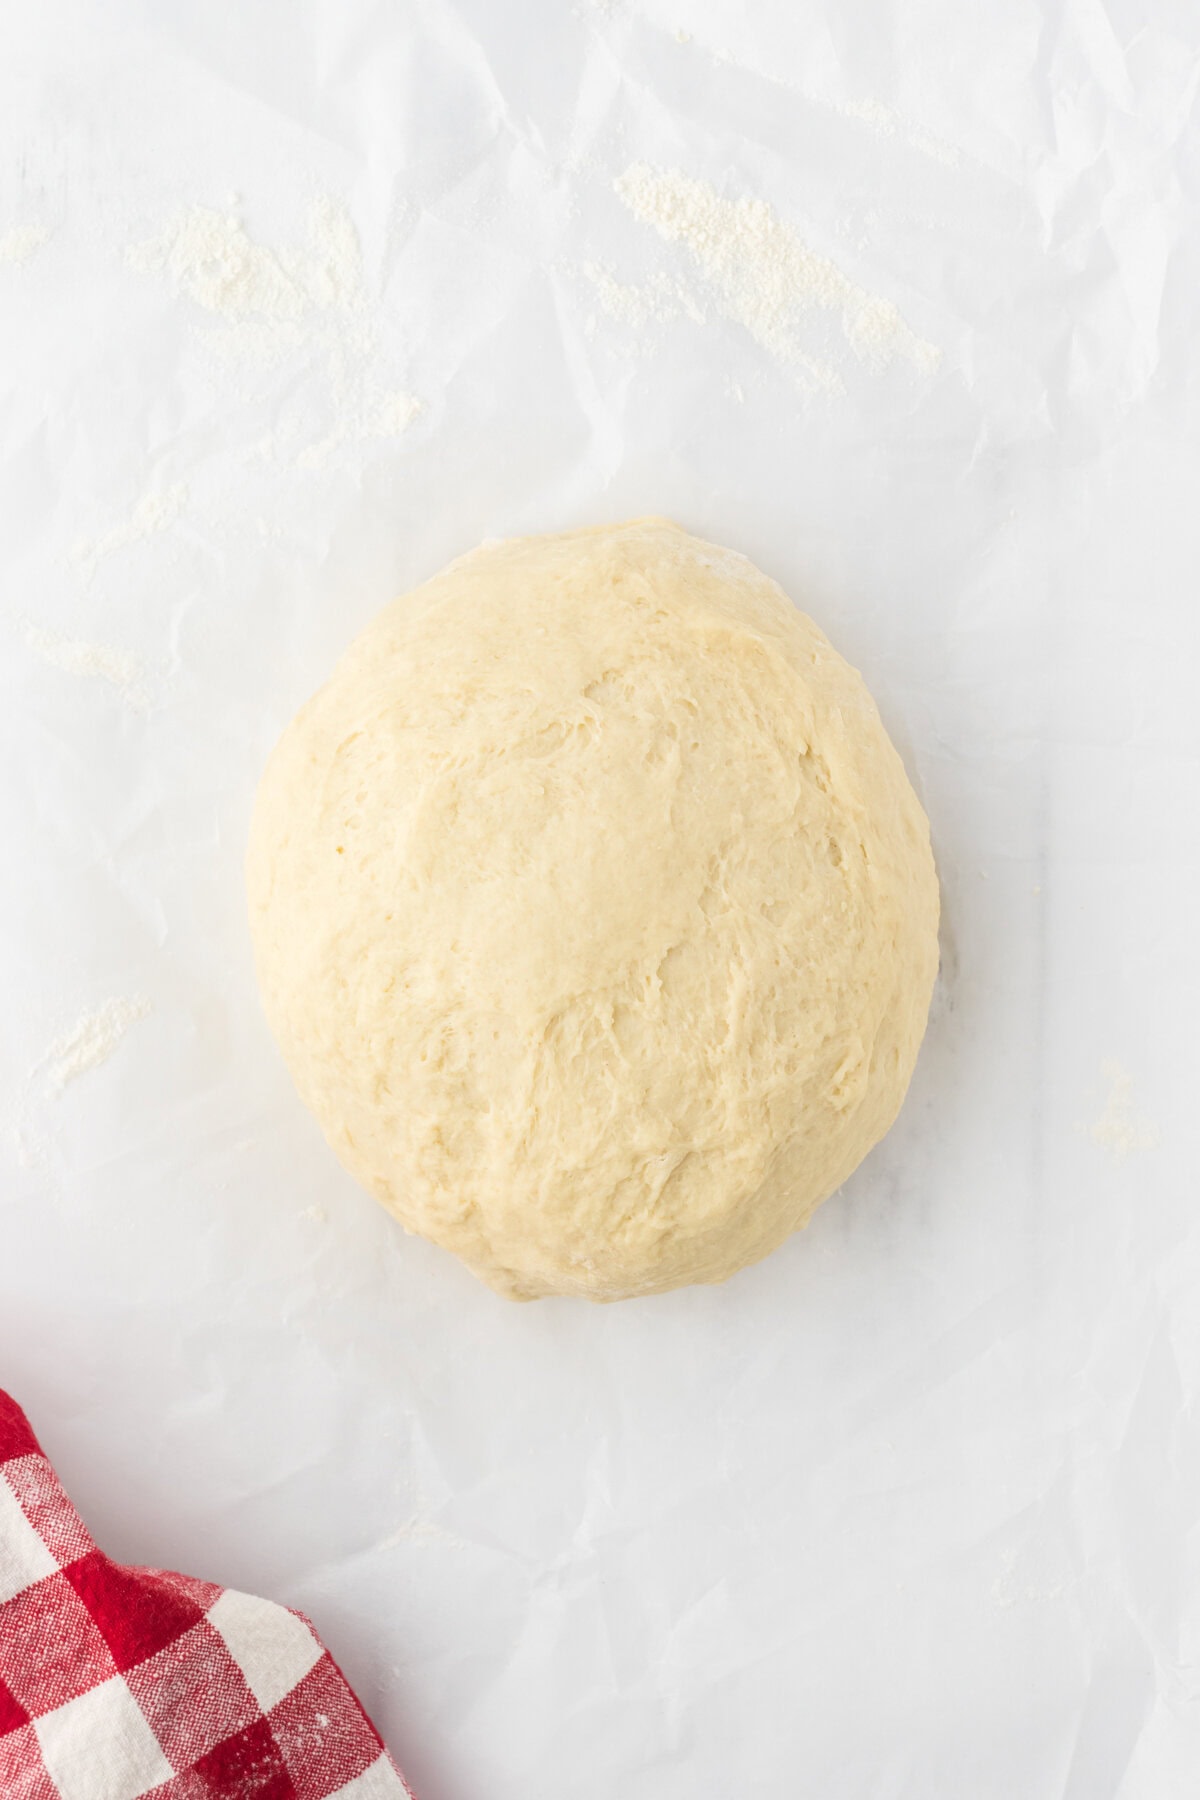 Finished dough is formed into a ball.